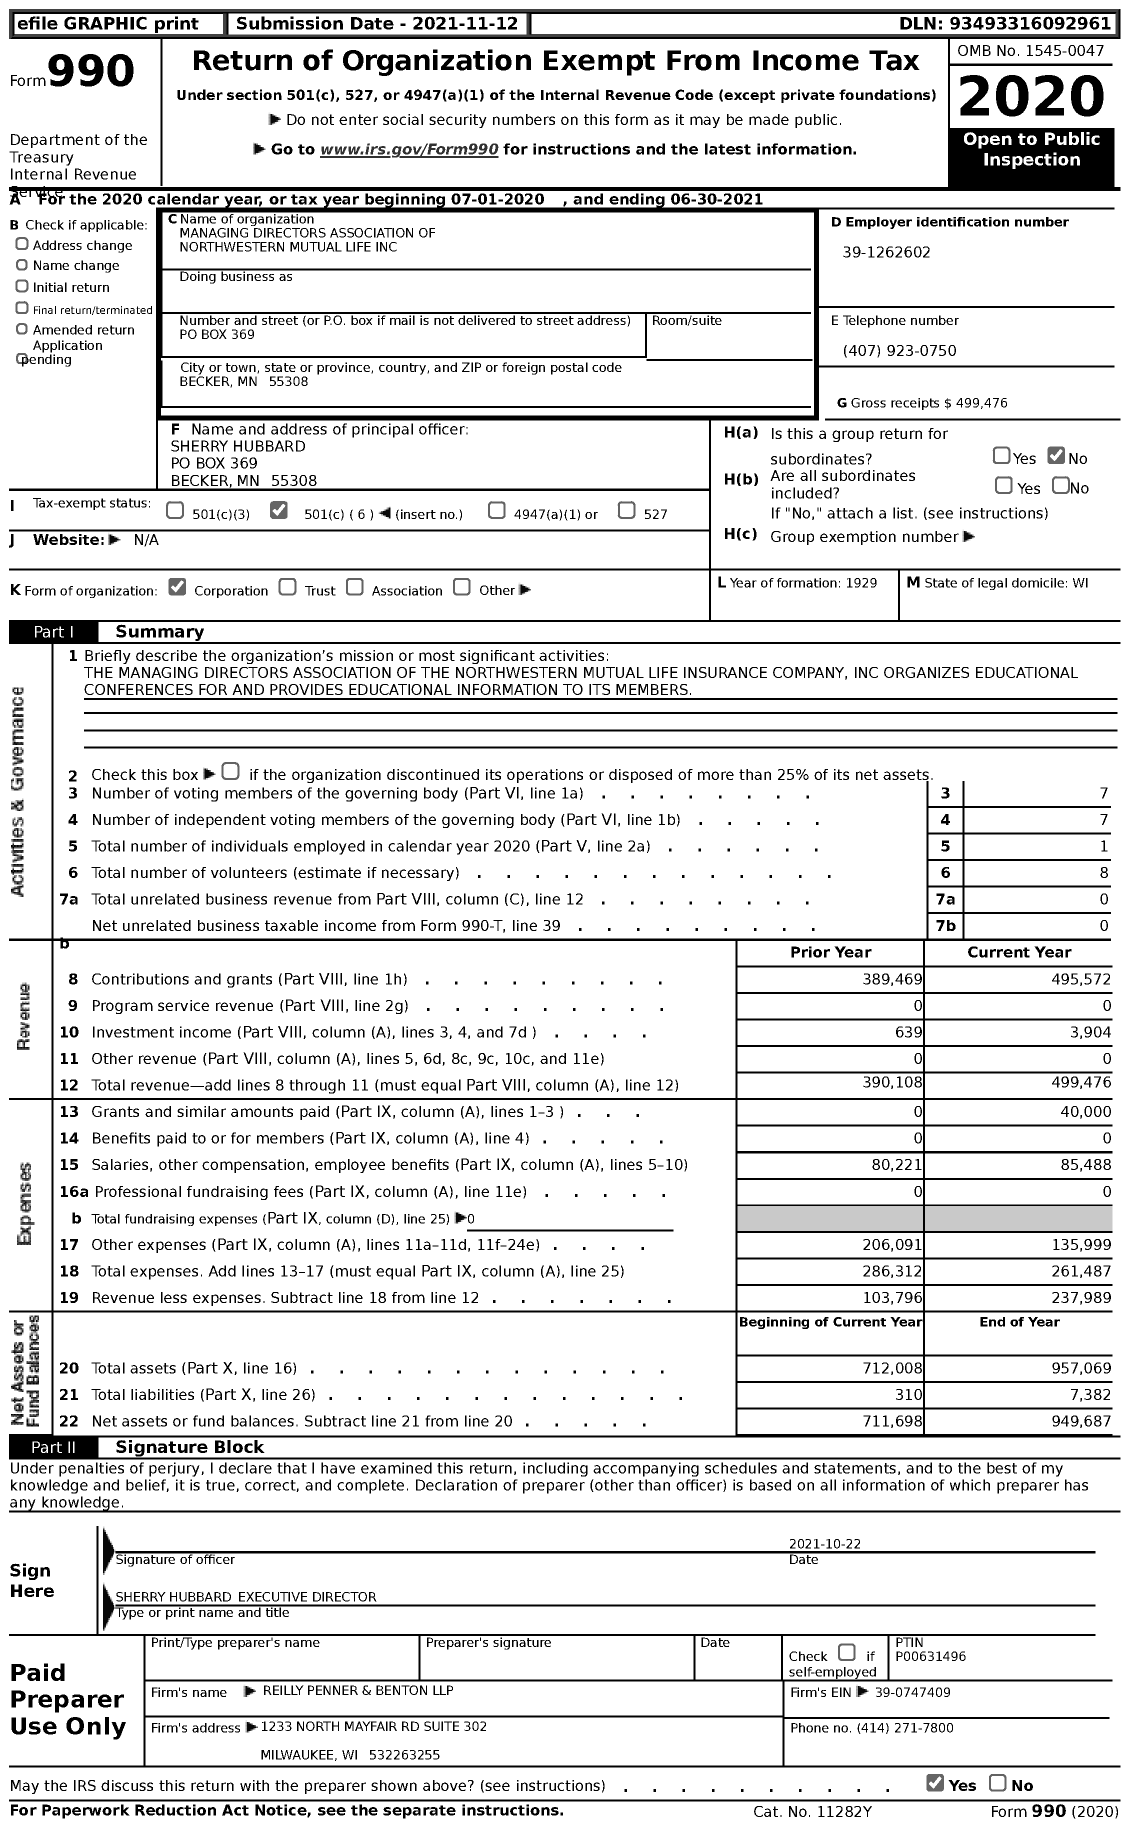 Image of first page of 2020 Form 990 for Managing Directors Association of Northwestern Mutual Life